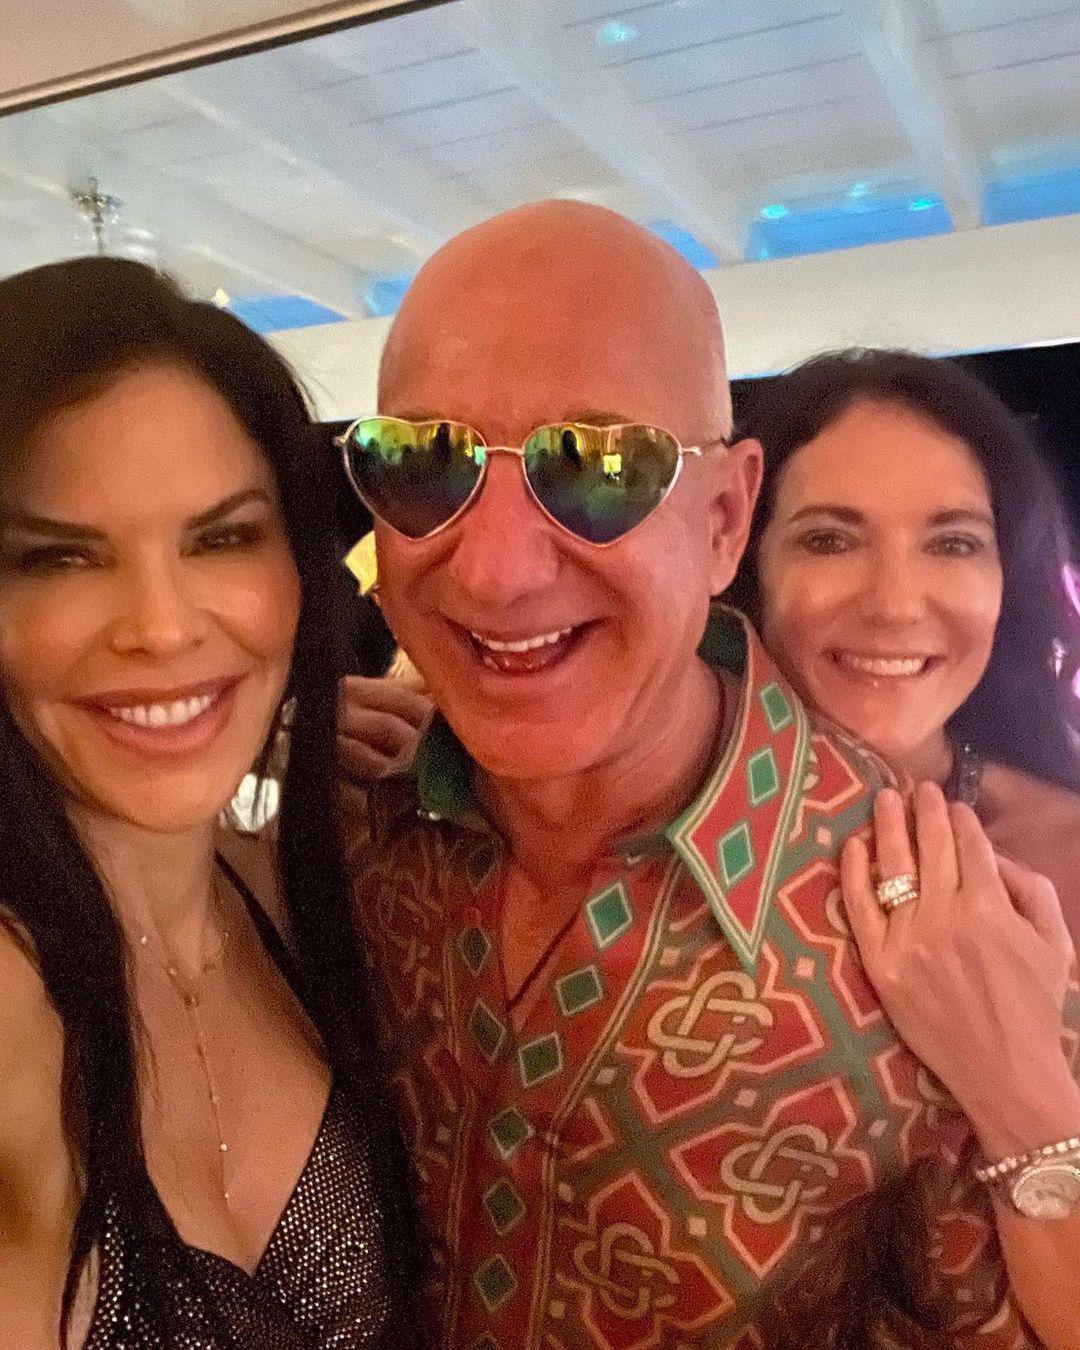 Jeff Bezos And His Girlfriend Lauren Sanchez Are Having The Time Of